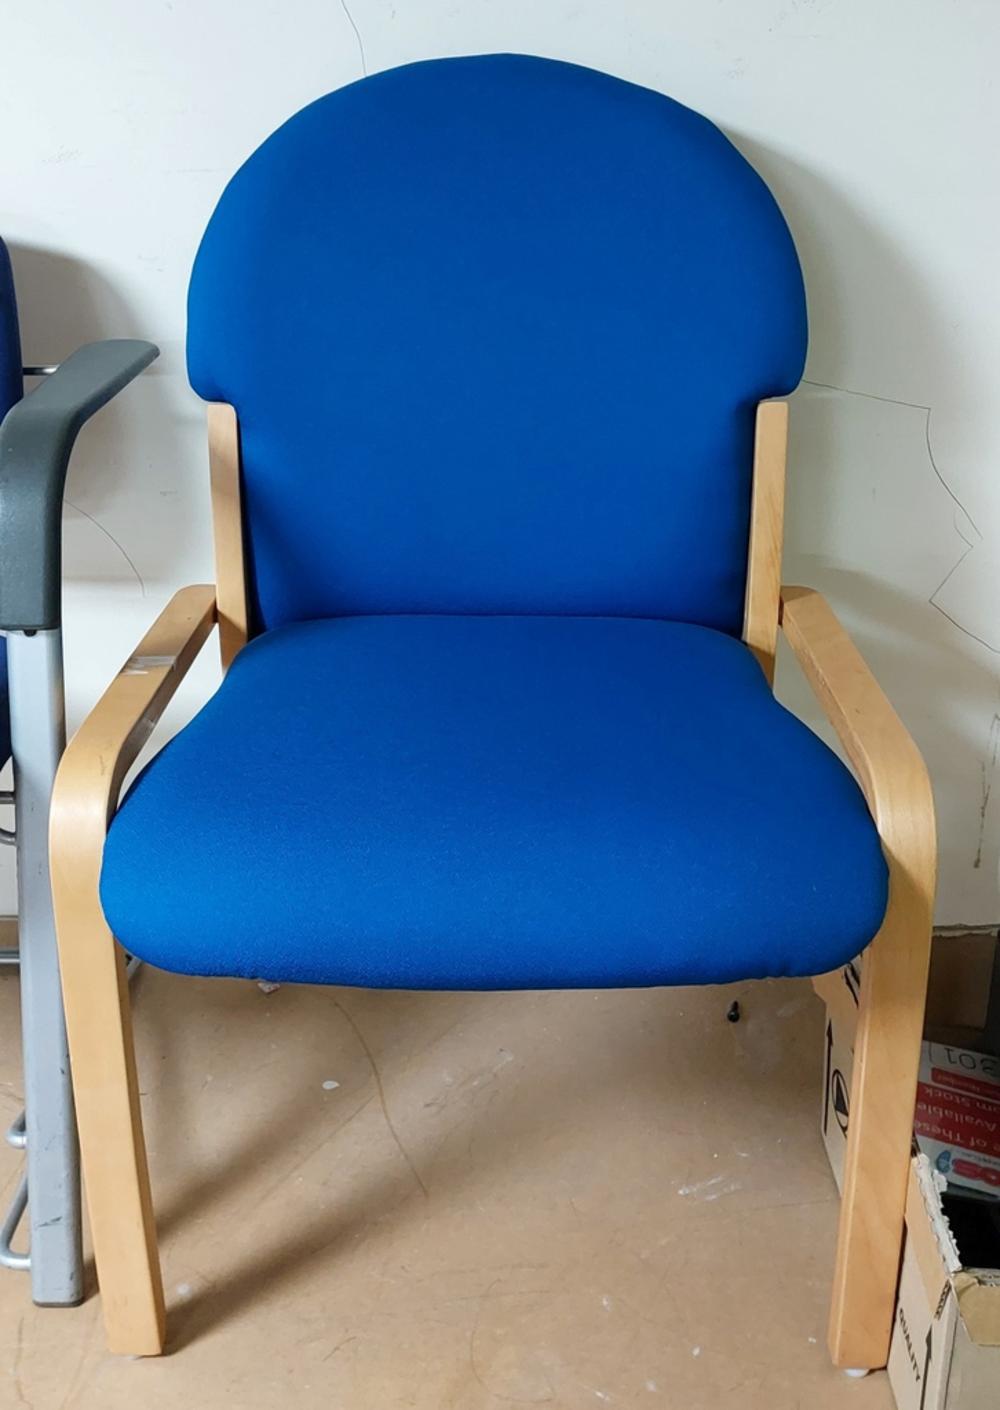 Blue Low Level Reception Chair with Wooden Frame